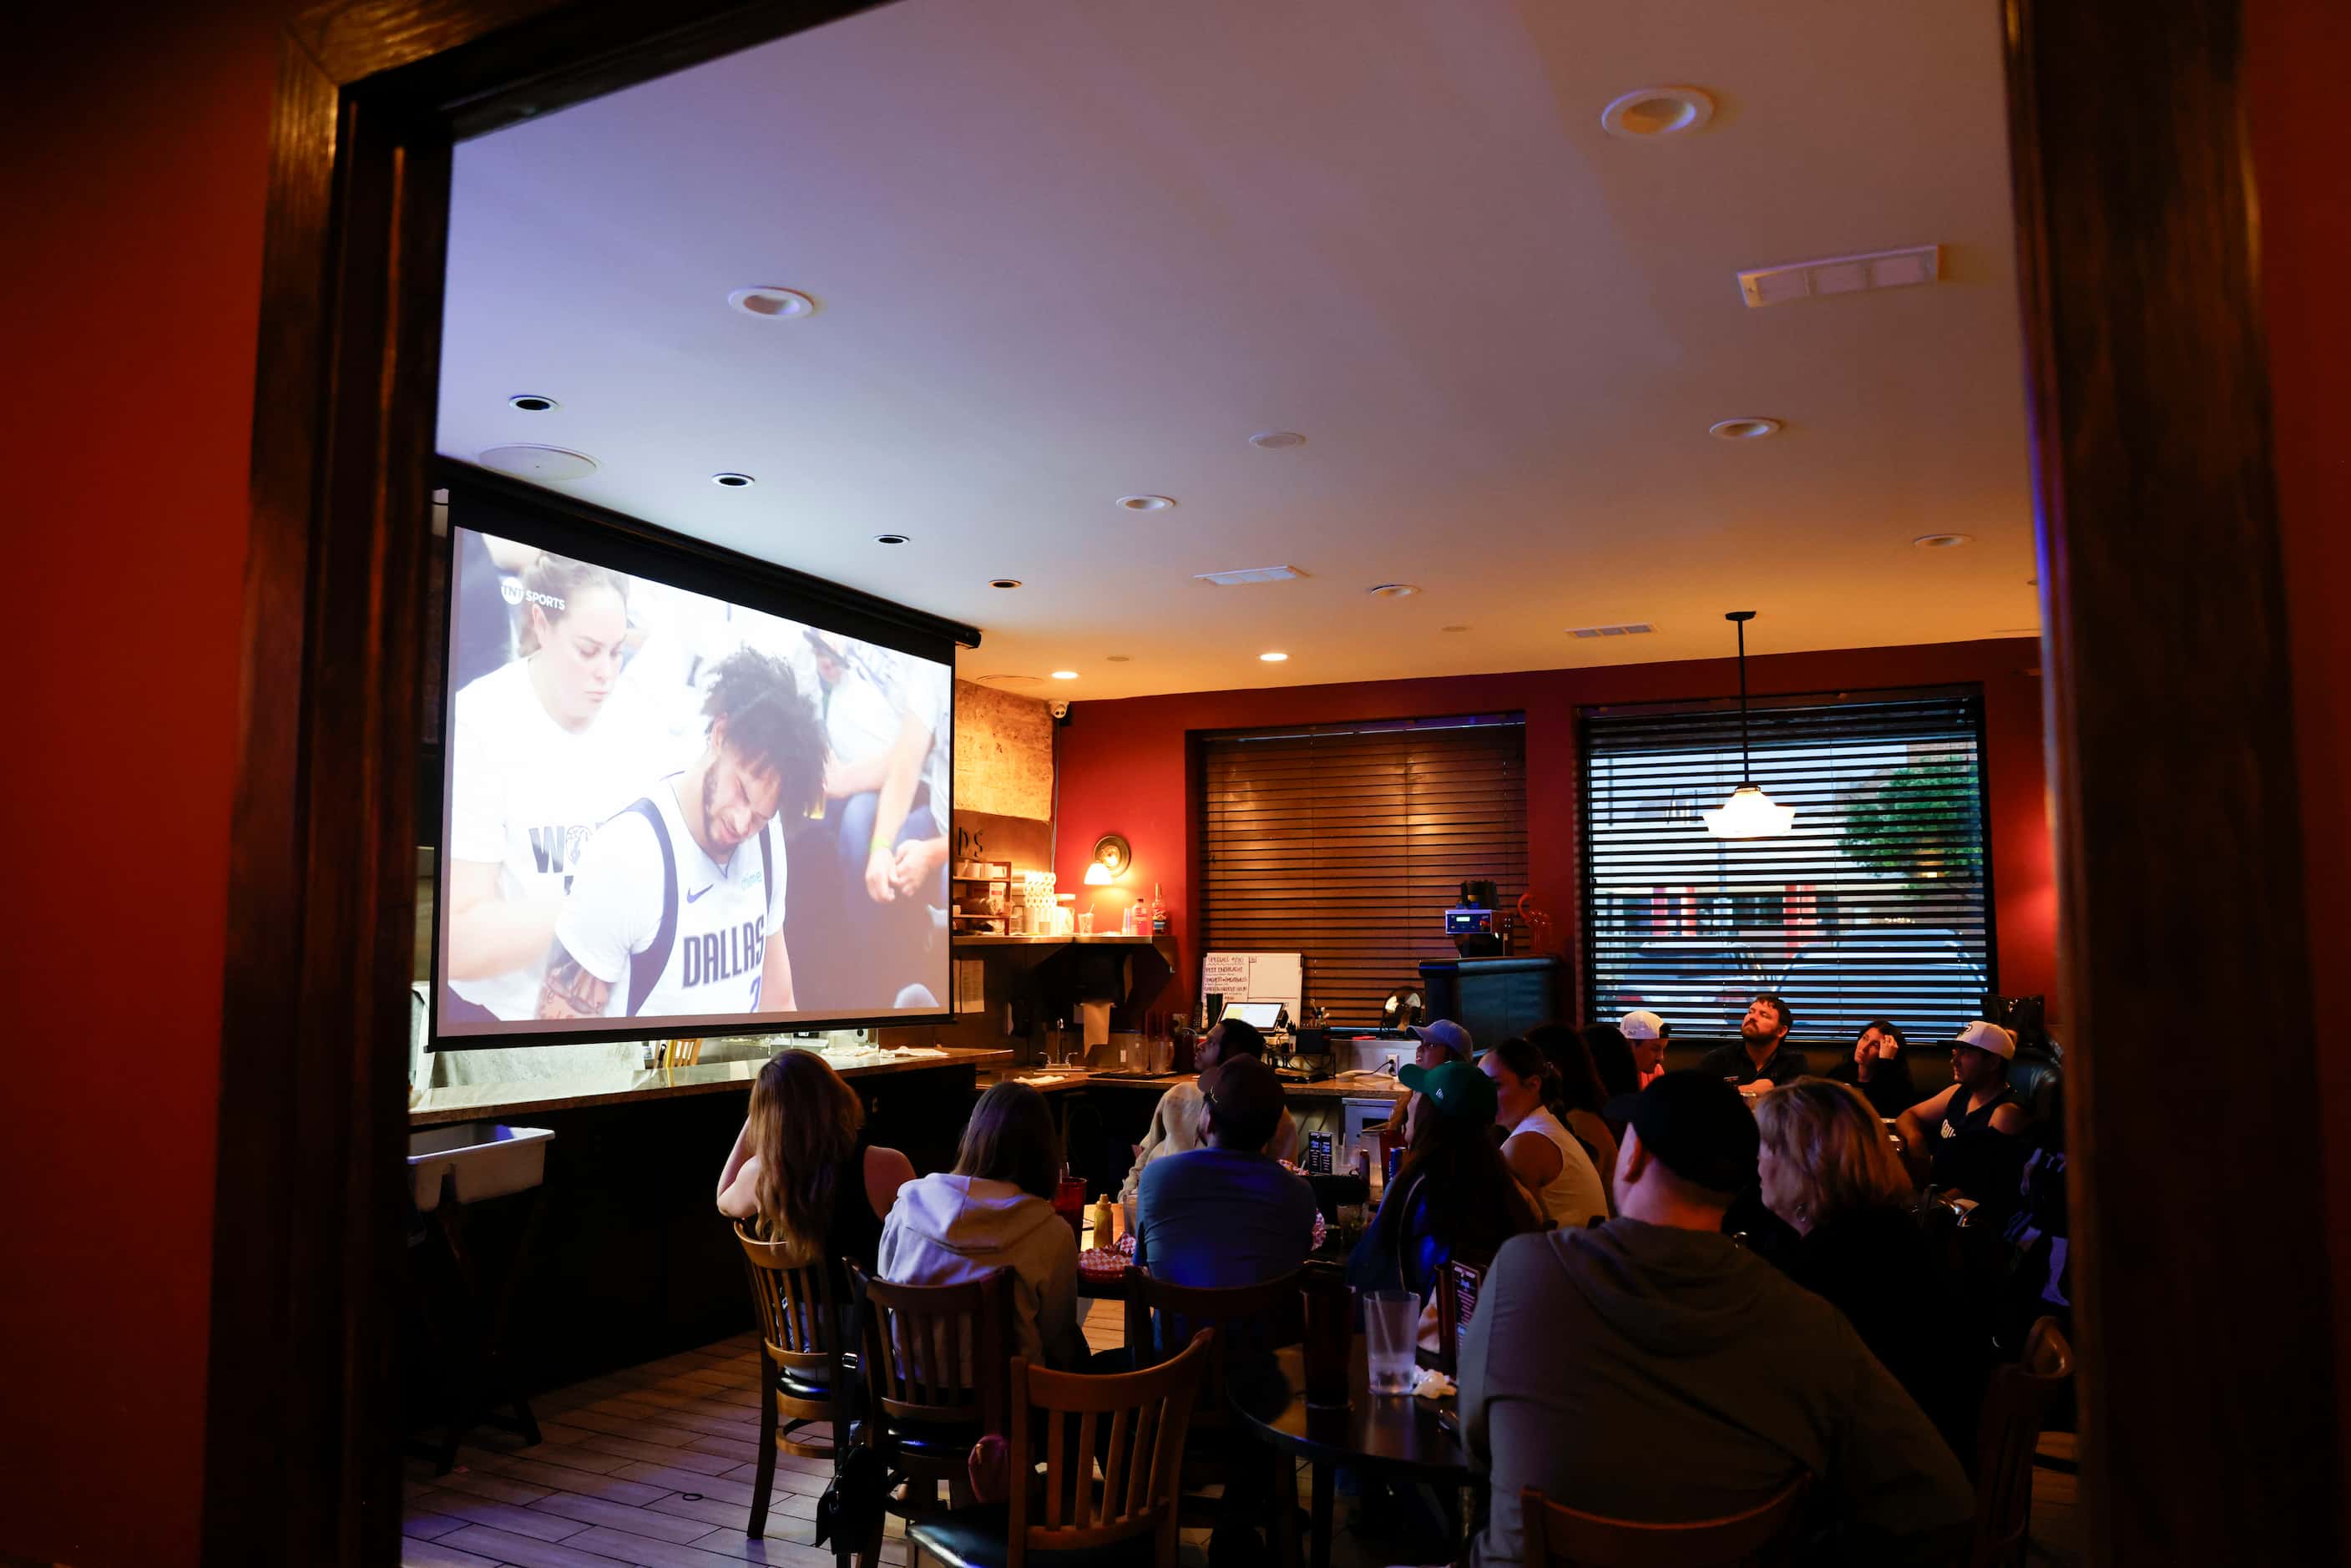 Customers watch a Dallas Mavericks playoff game at the new Stoneleigh P.